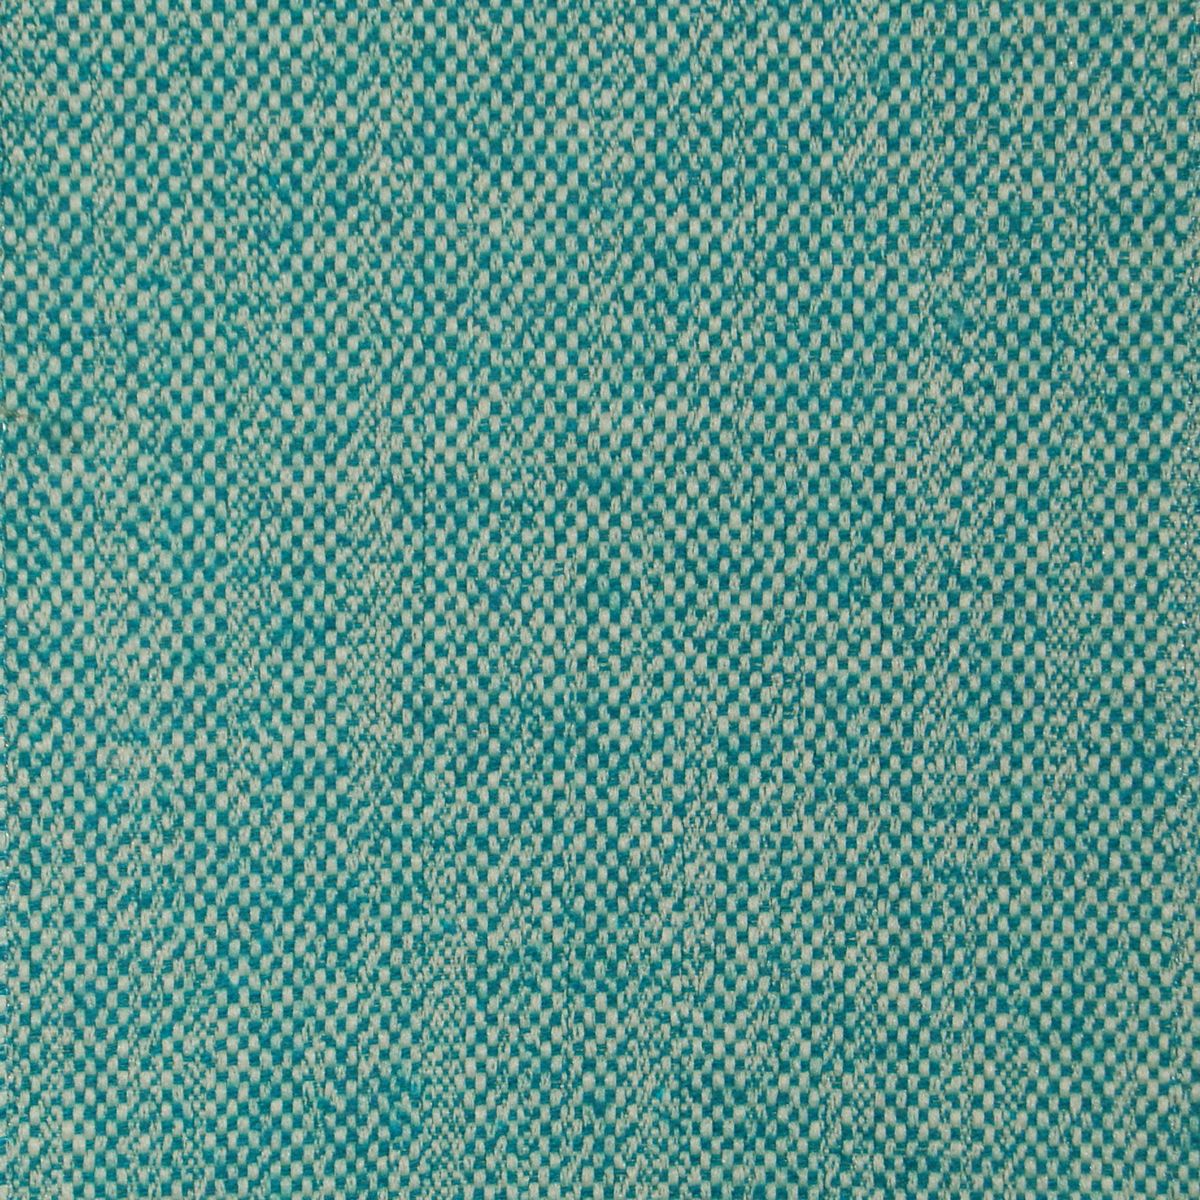 Selkirk Aqua Fabric by Voyage Maison